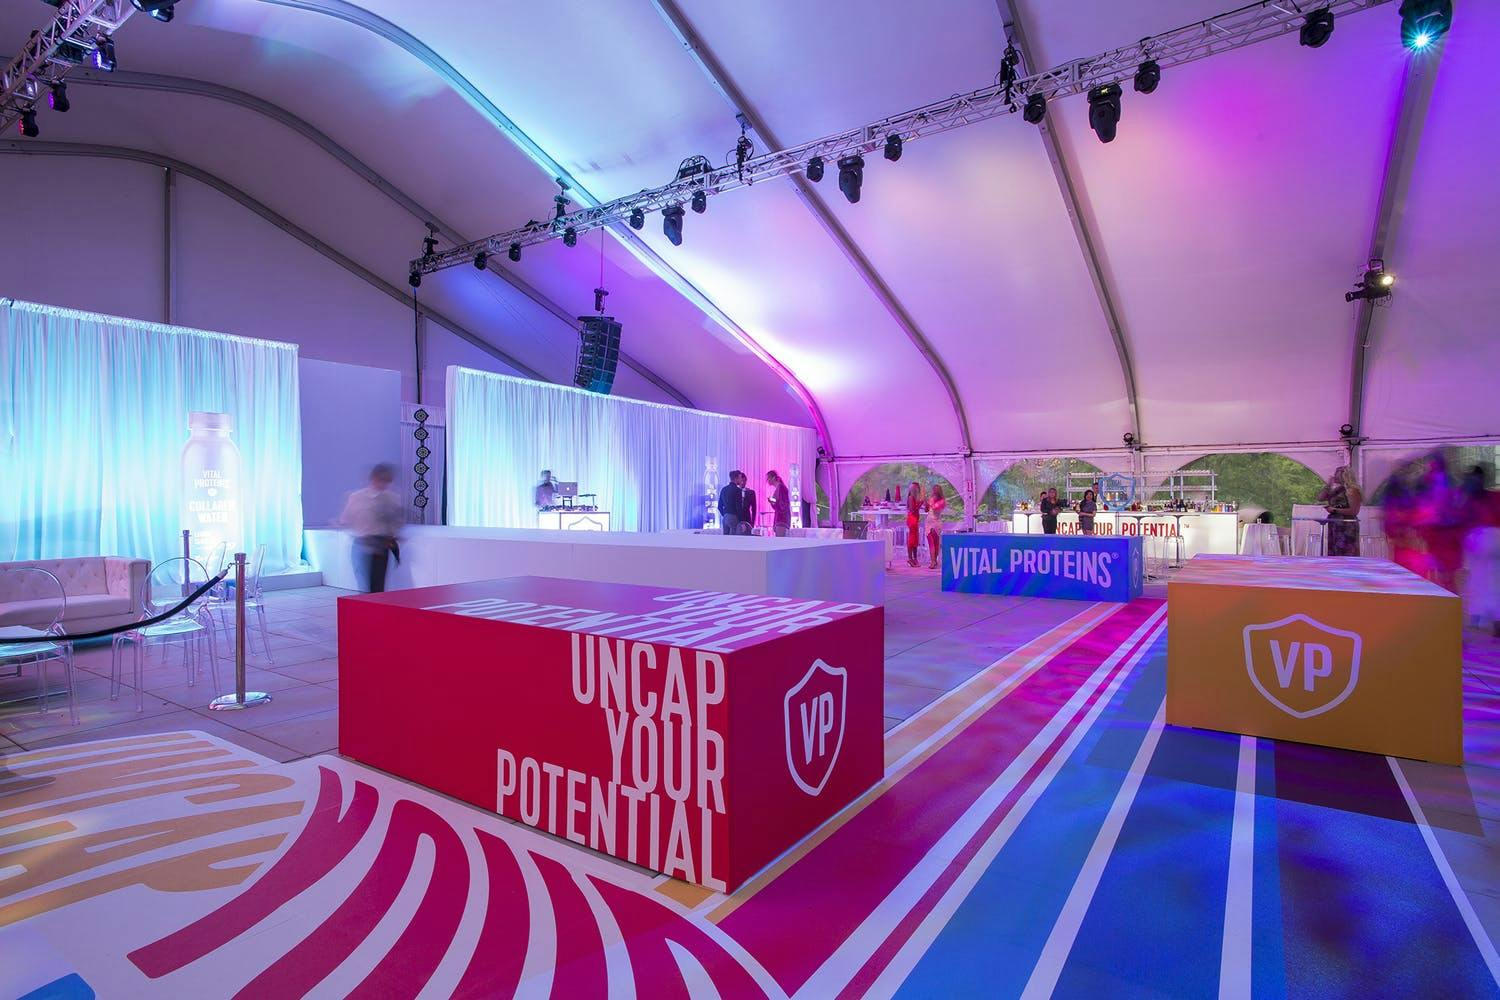 Tented space with colorful and geometric "VP" branding.